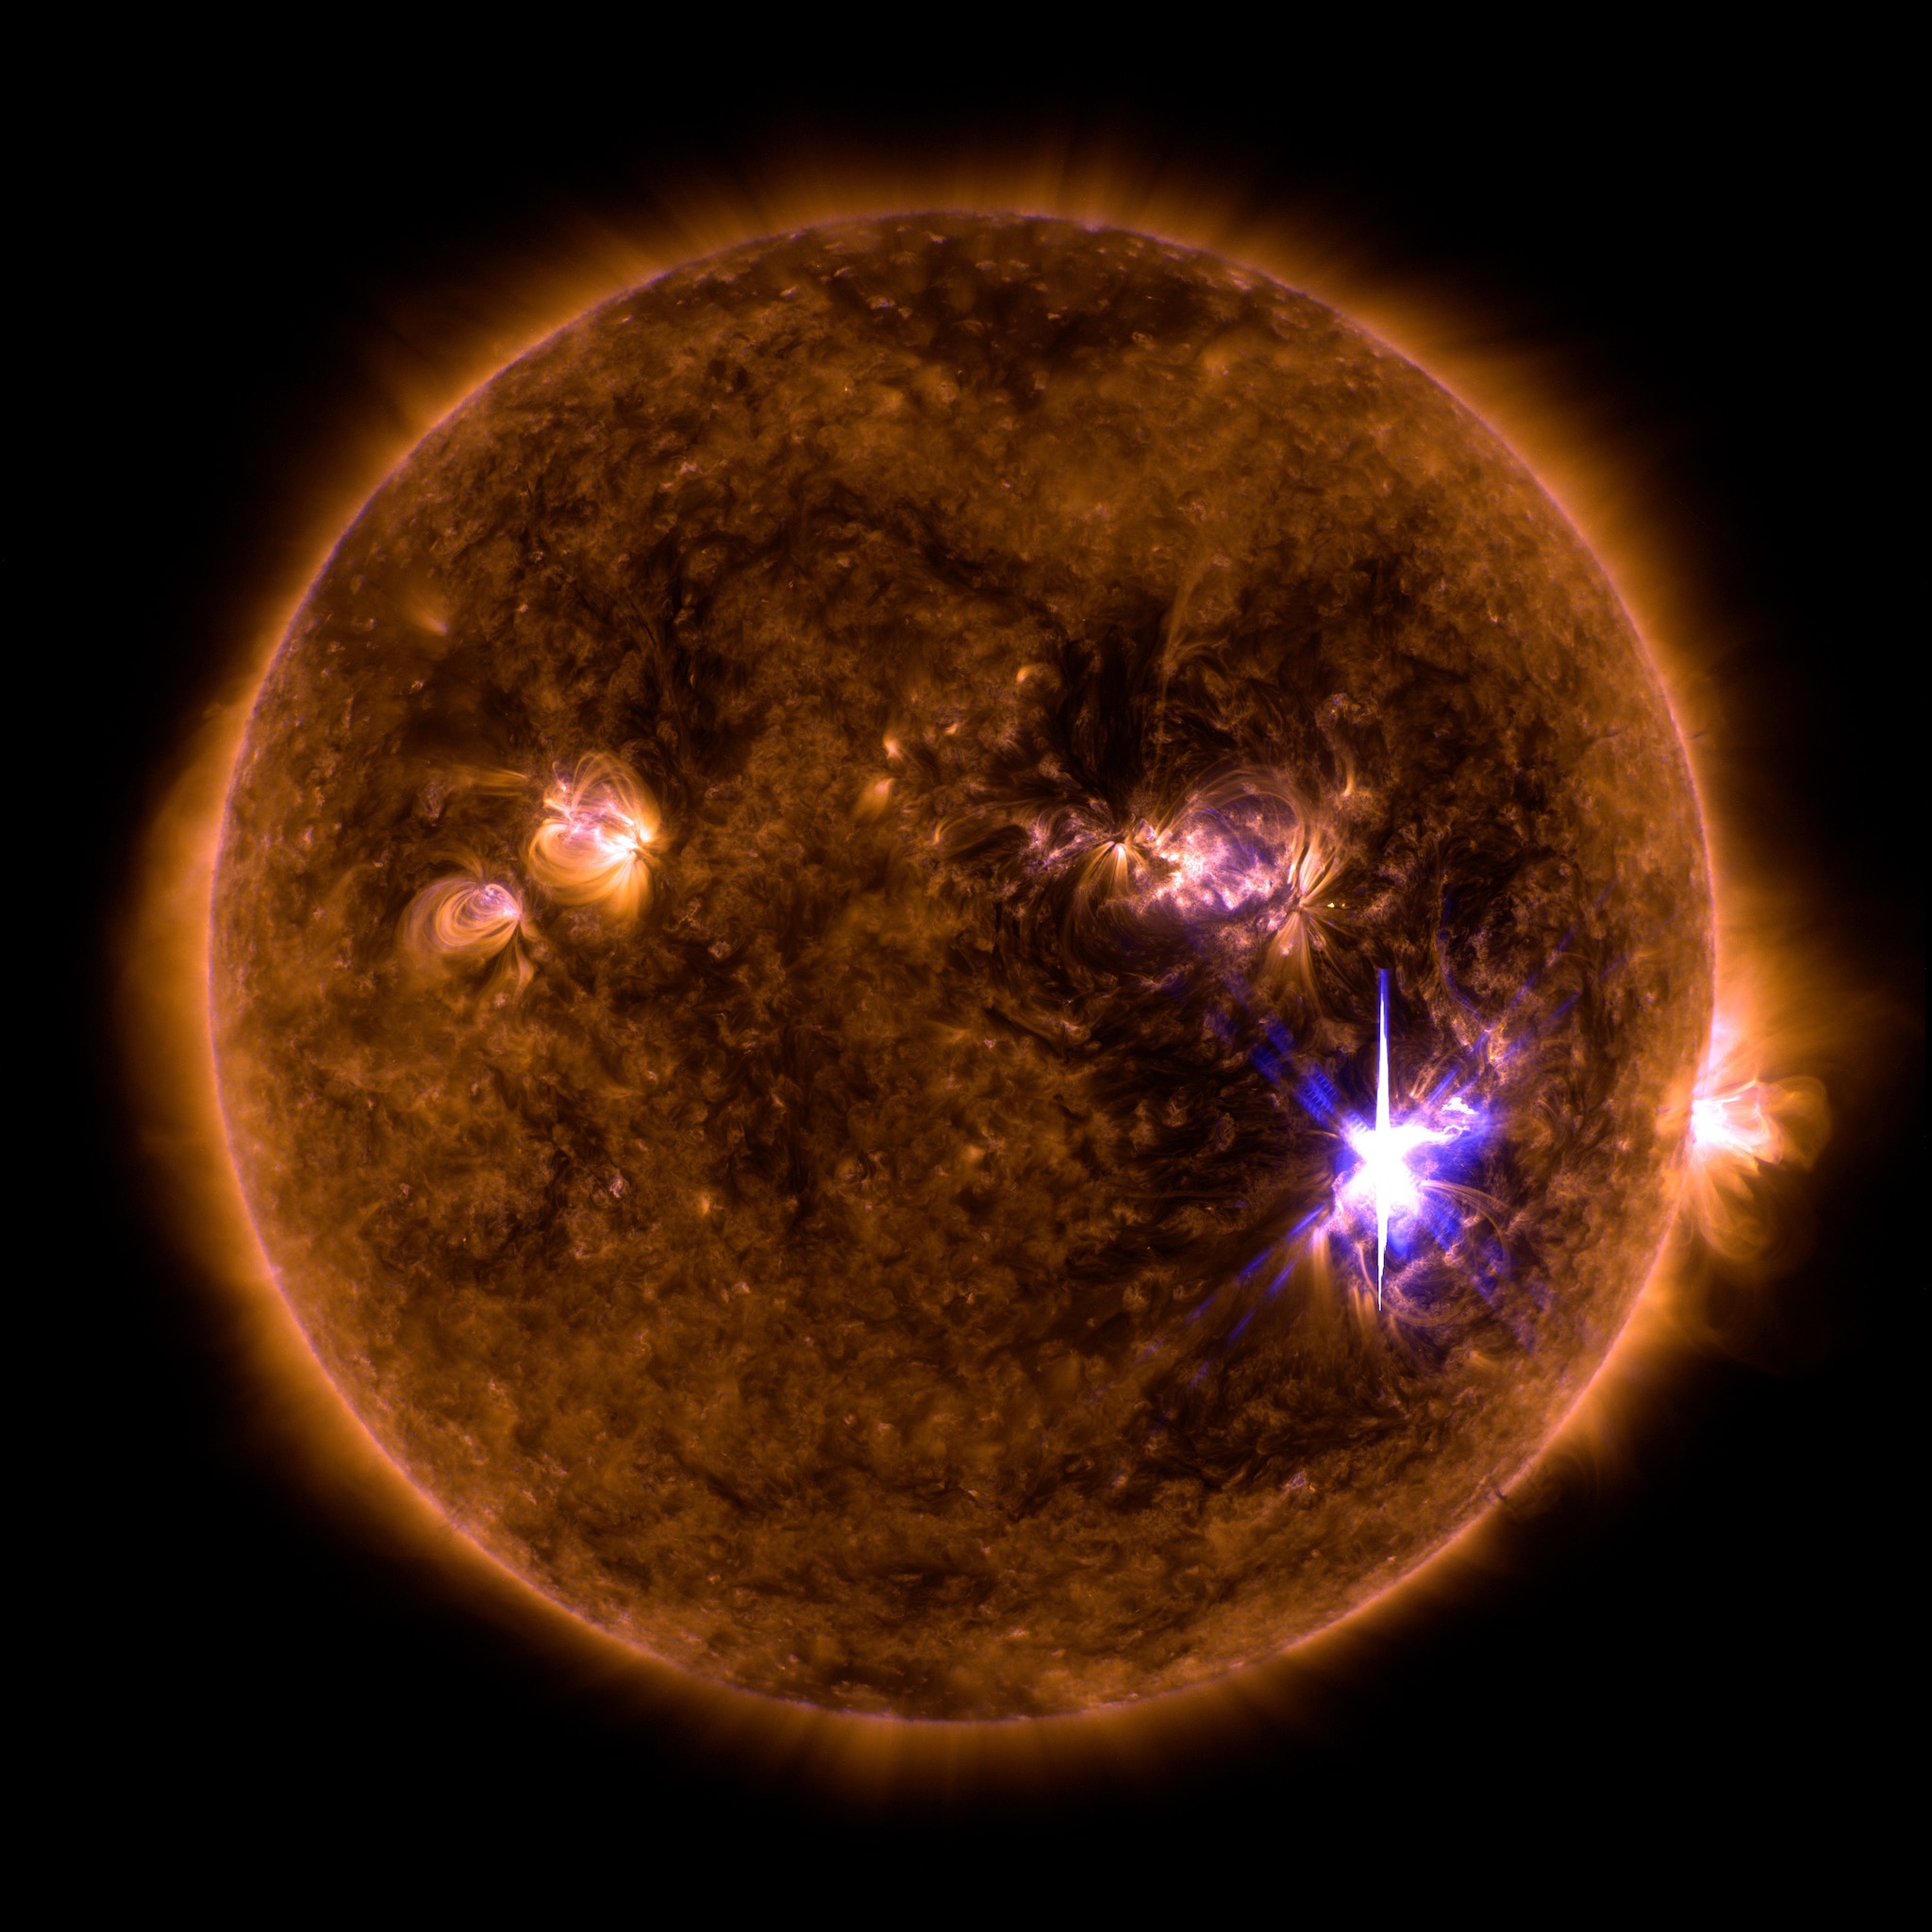 An X9.3 class solar flare flashes in the middle of the Sun on Sept. 6, 2017. This image was captured by NASA's Solar Dynamics Observatory and shows a blend of light from the 171 and 131 angstrom wavelengths.Credit: NASA/GSFC/SDO